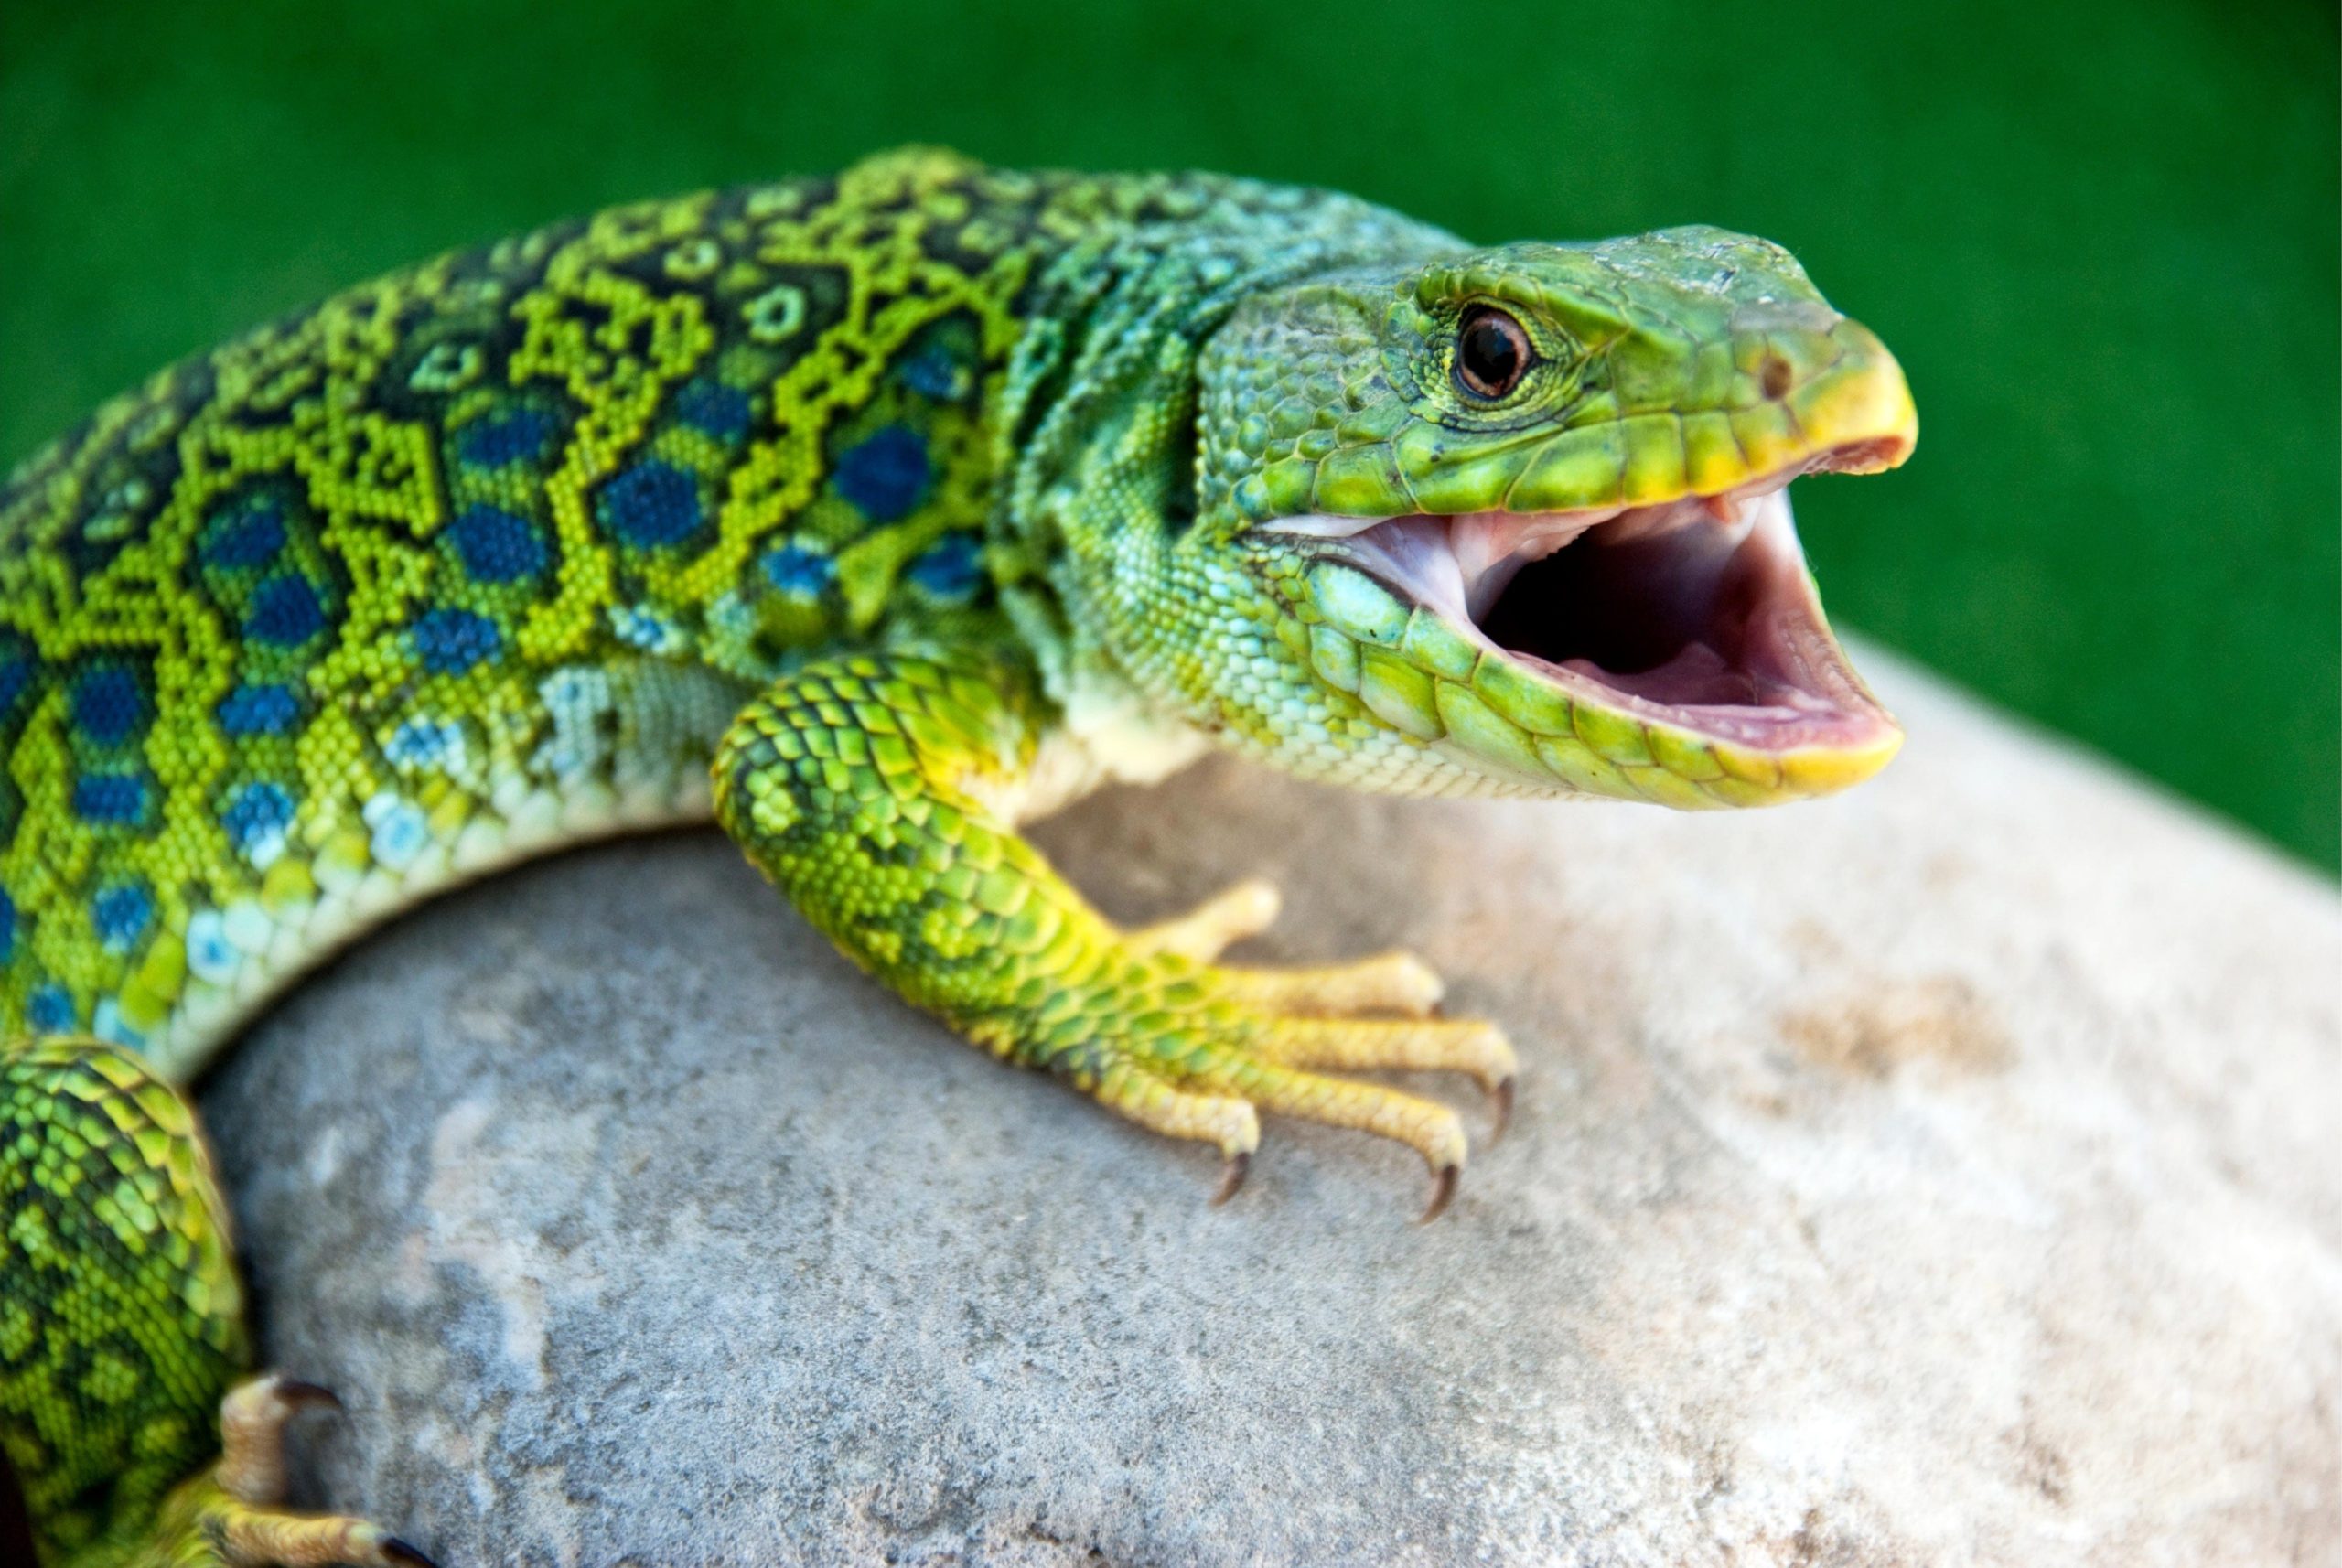 Secret of Lizard Camouflage: A Simple Mathematical Equation